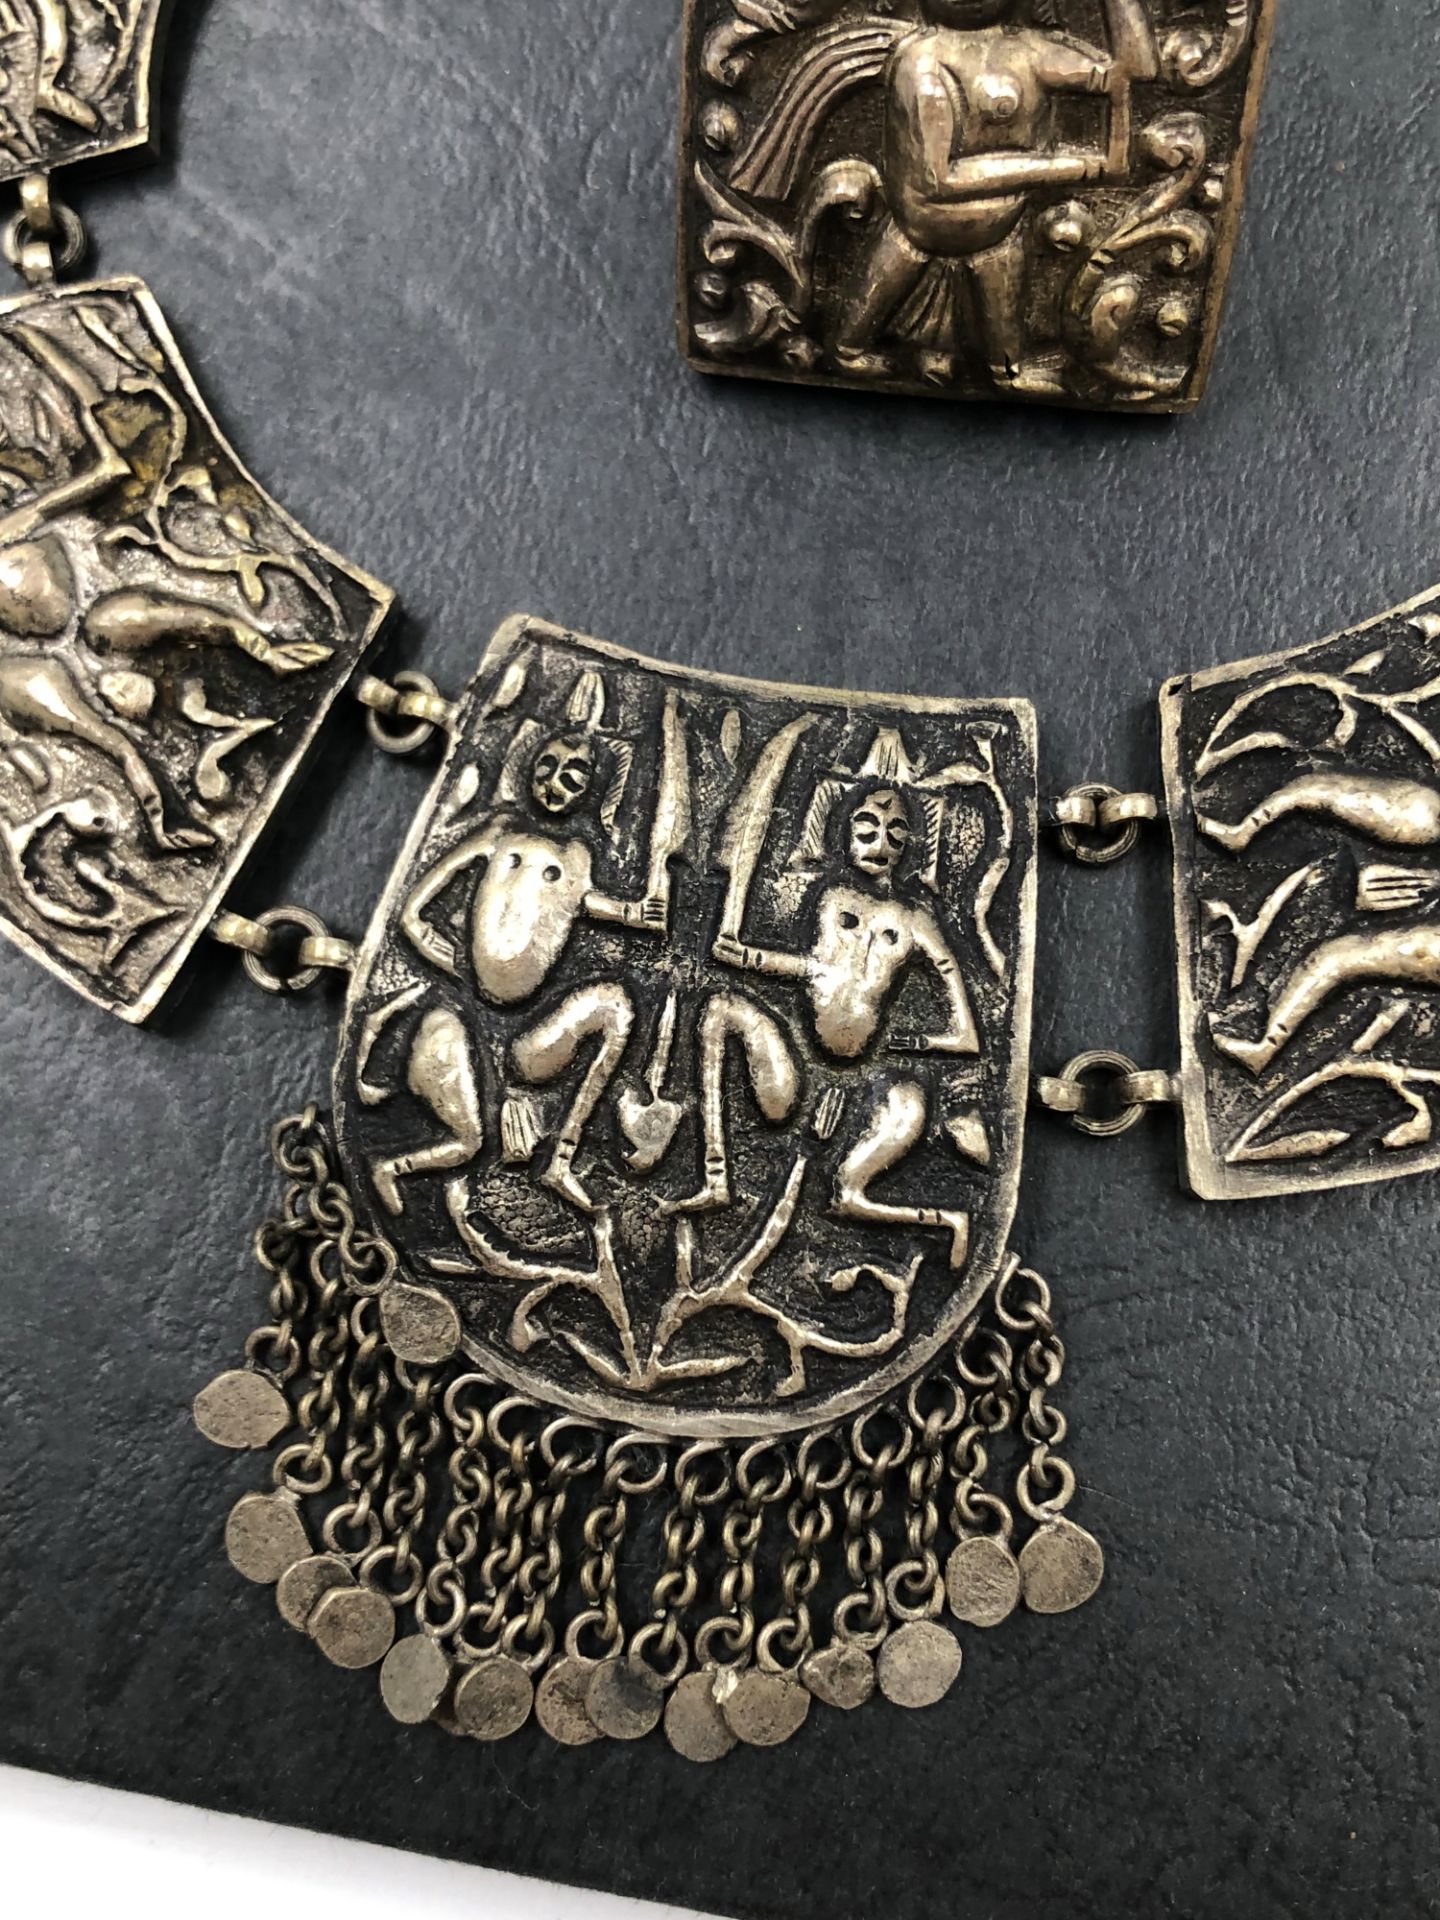 A MULTI PANEL NECKLACE, BRACELET AND RING SUITE. THE PANELS DEPICTING FIGURES IN VARIOUS SCENES. - Image 2 of 7